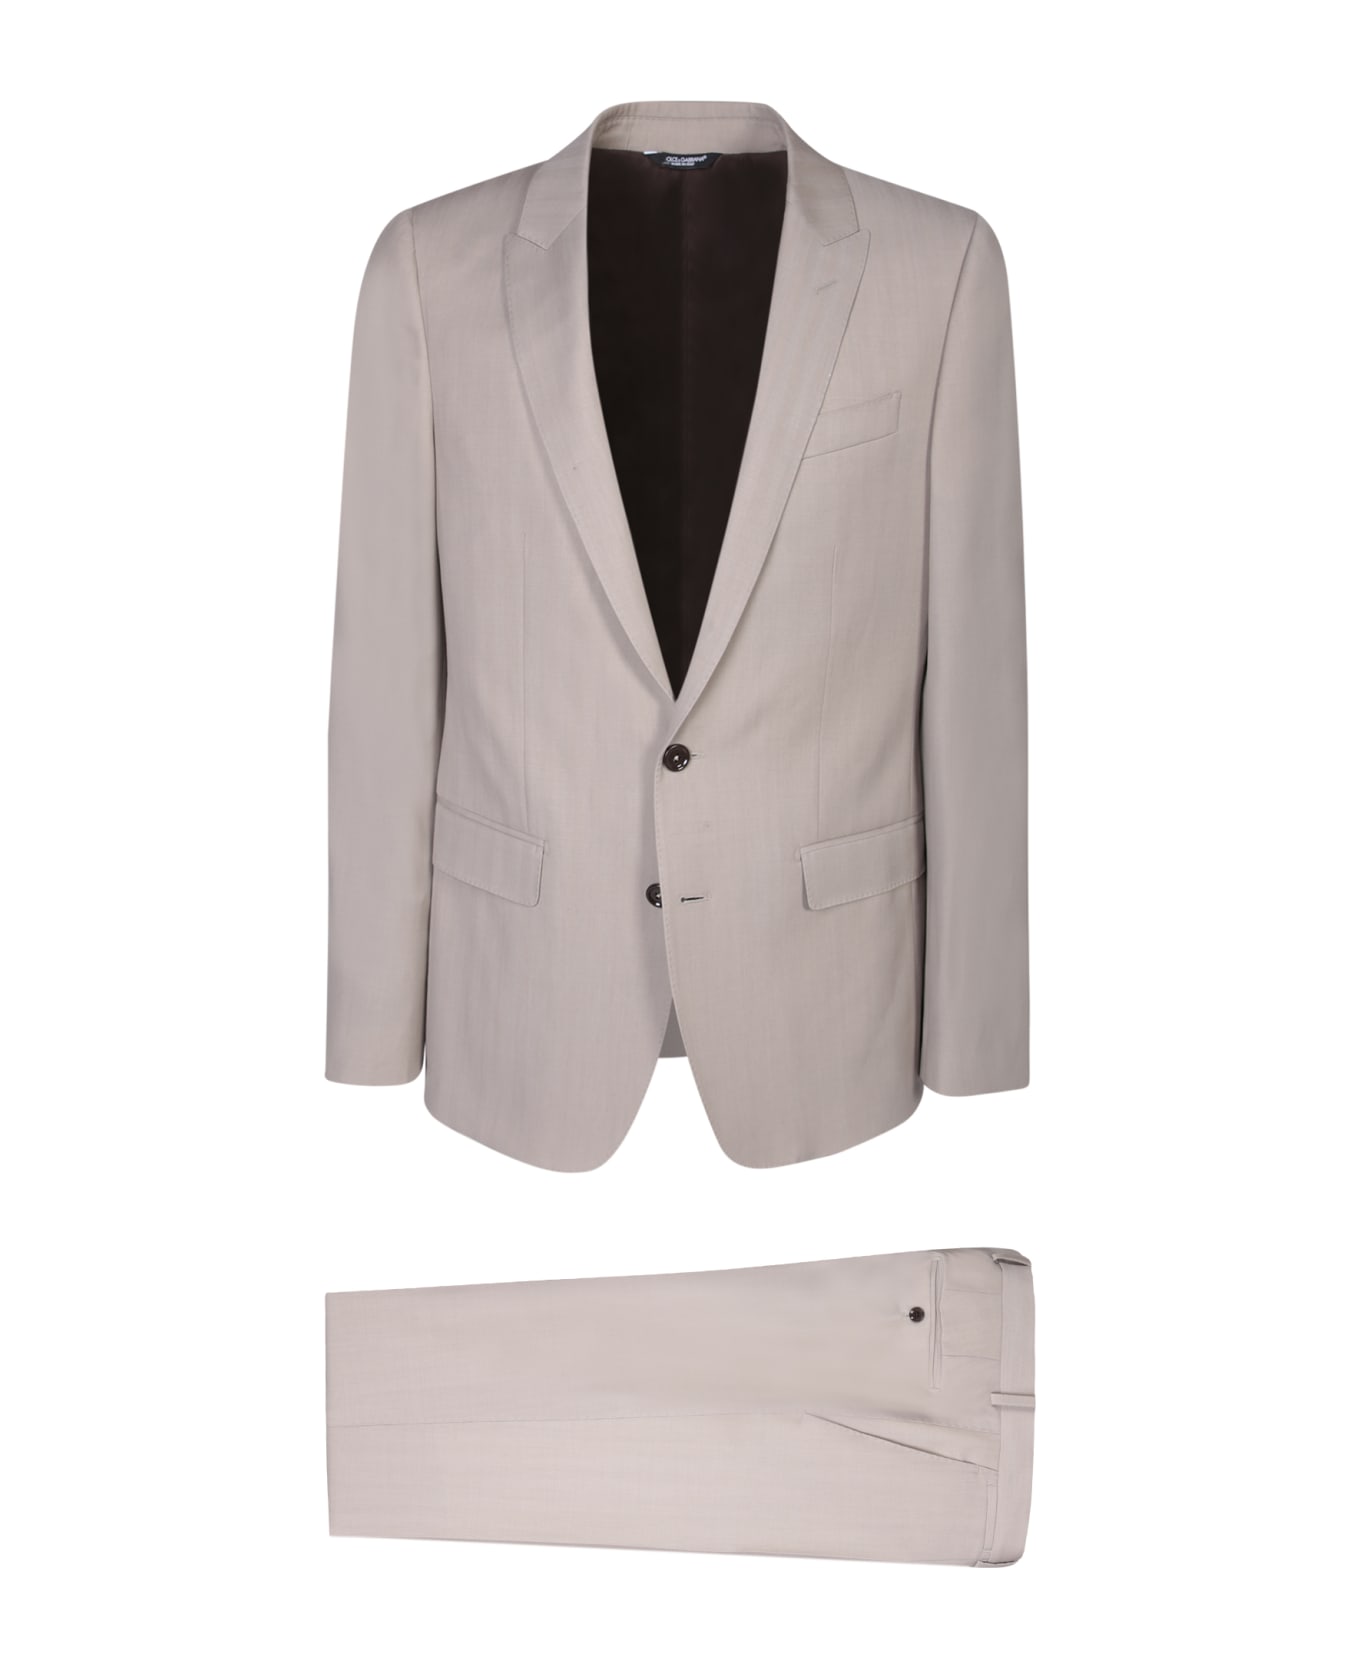 Dolce & Gabbana Single-breasted Suit - Beige スーツ